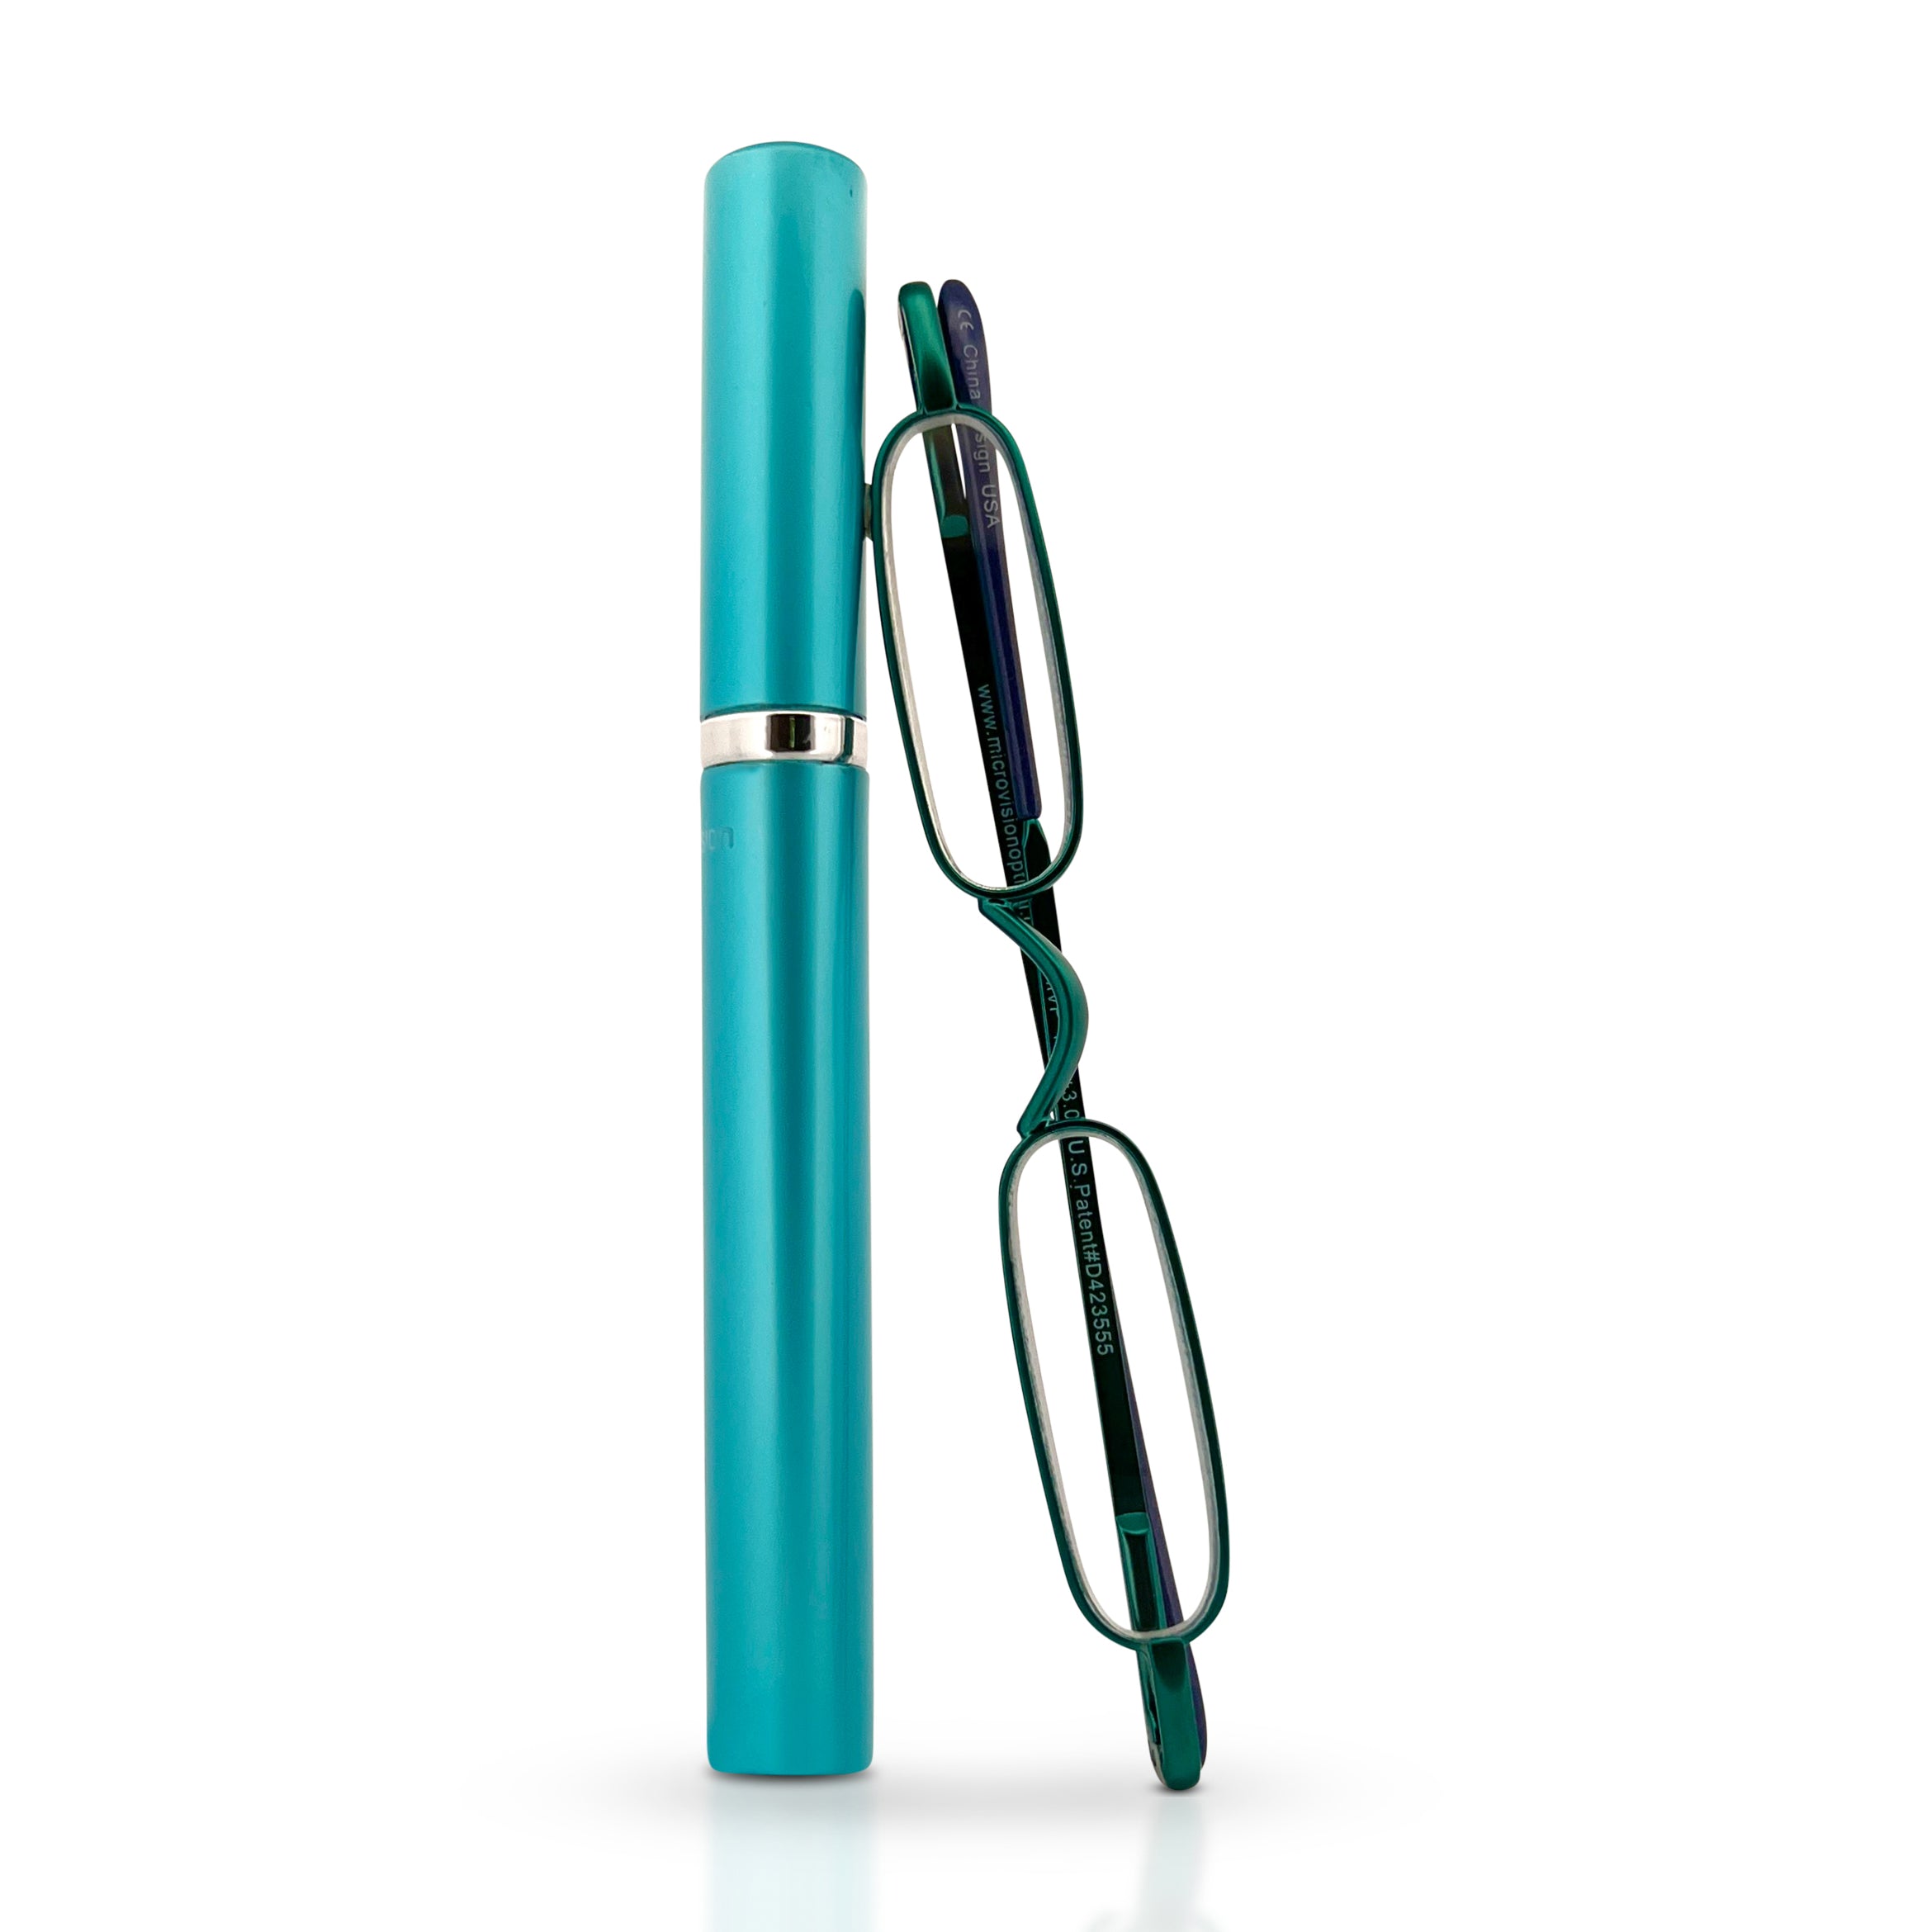 Aqua sleek, compact, patented, stainless steel, original mini readers perfect for on the go